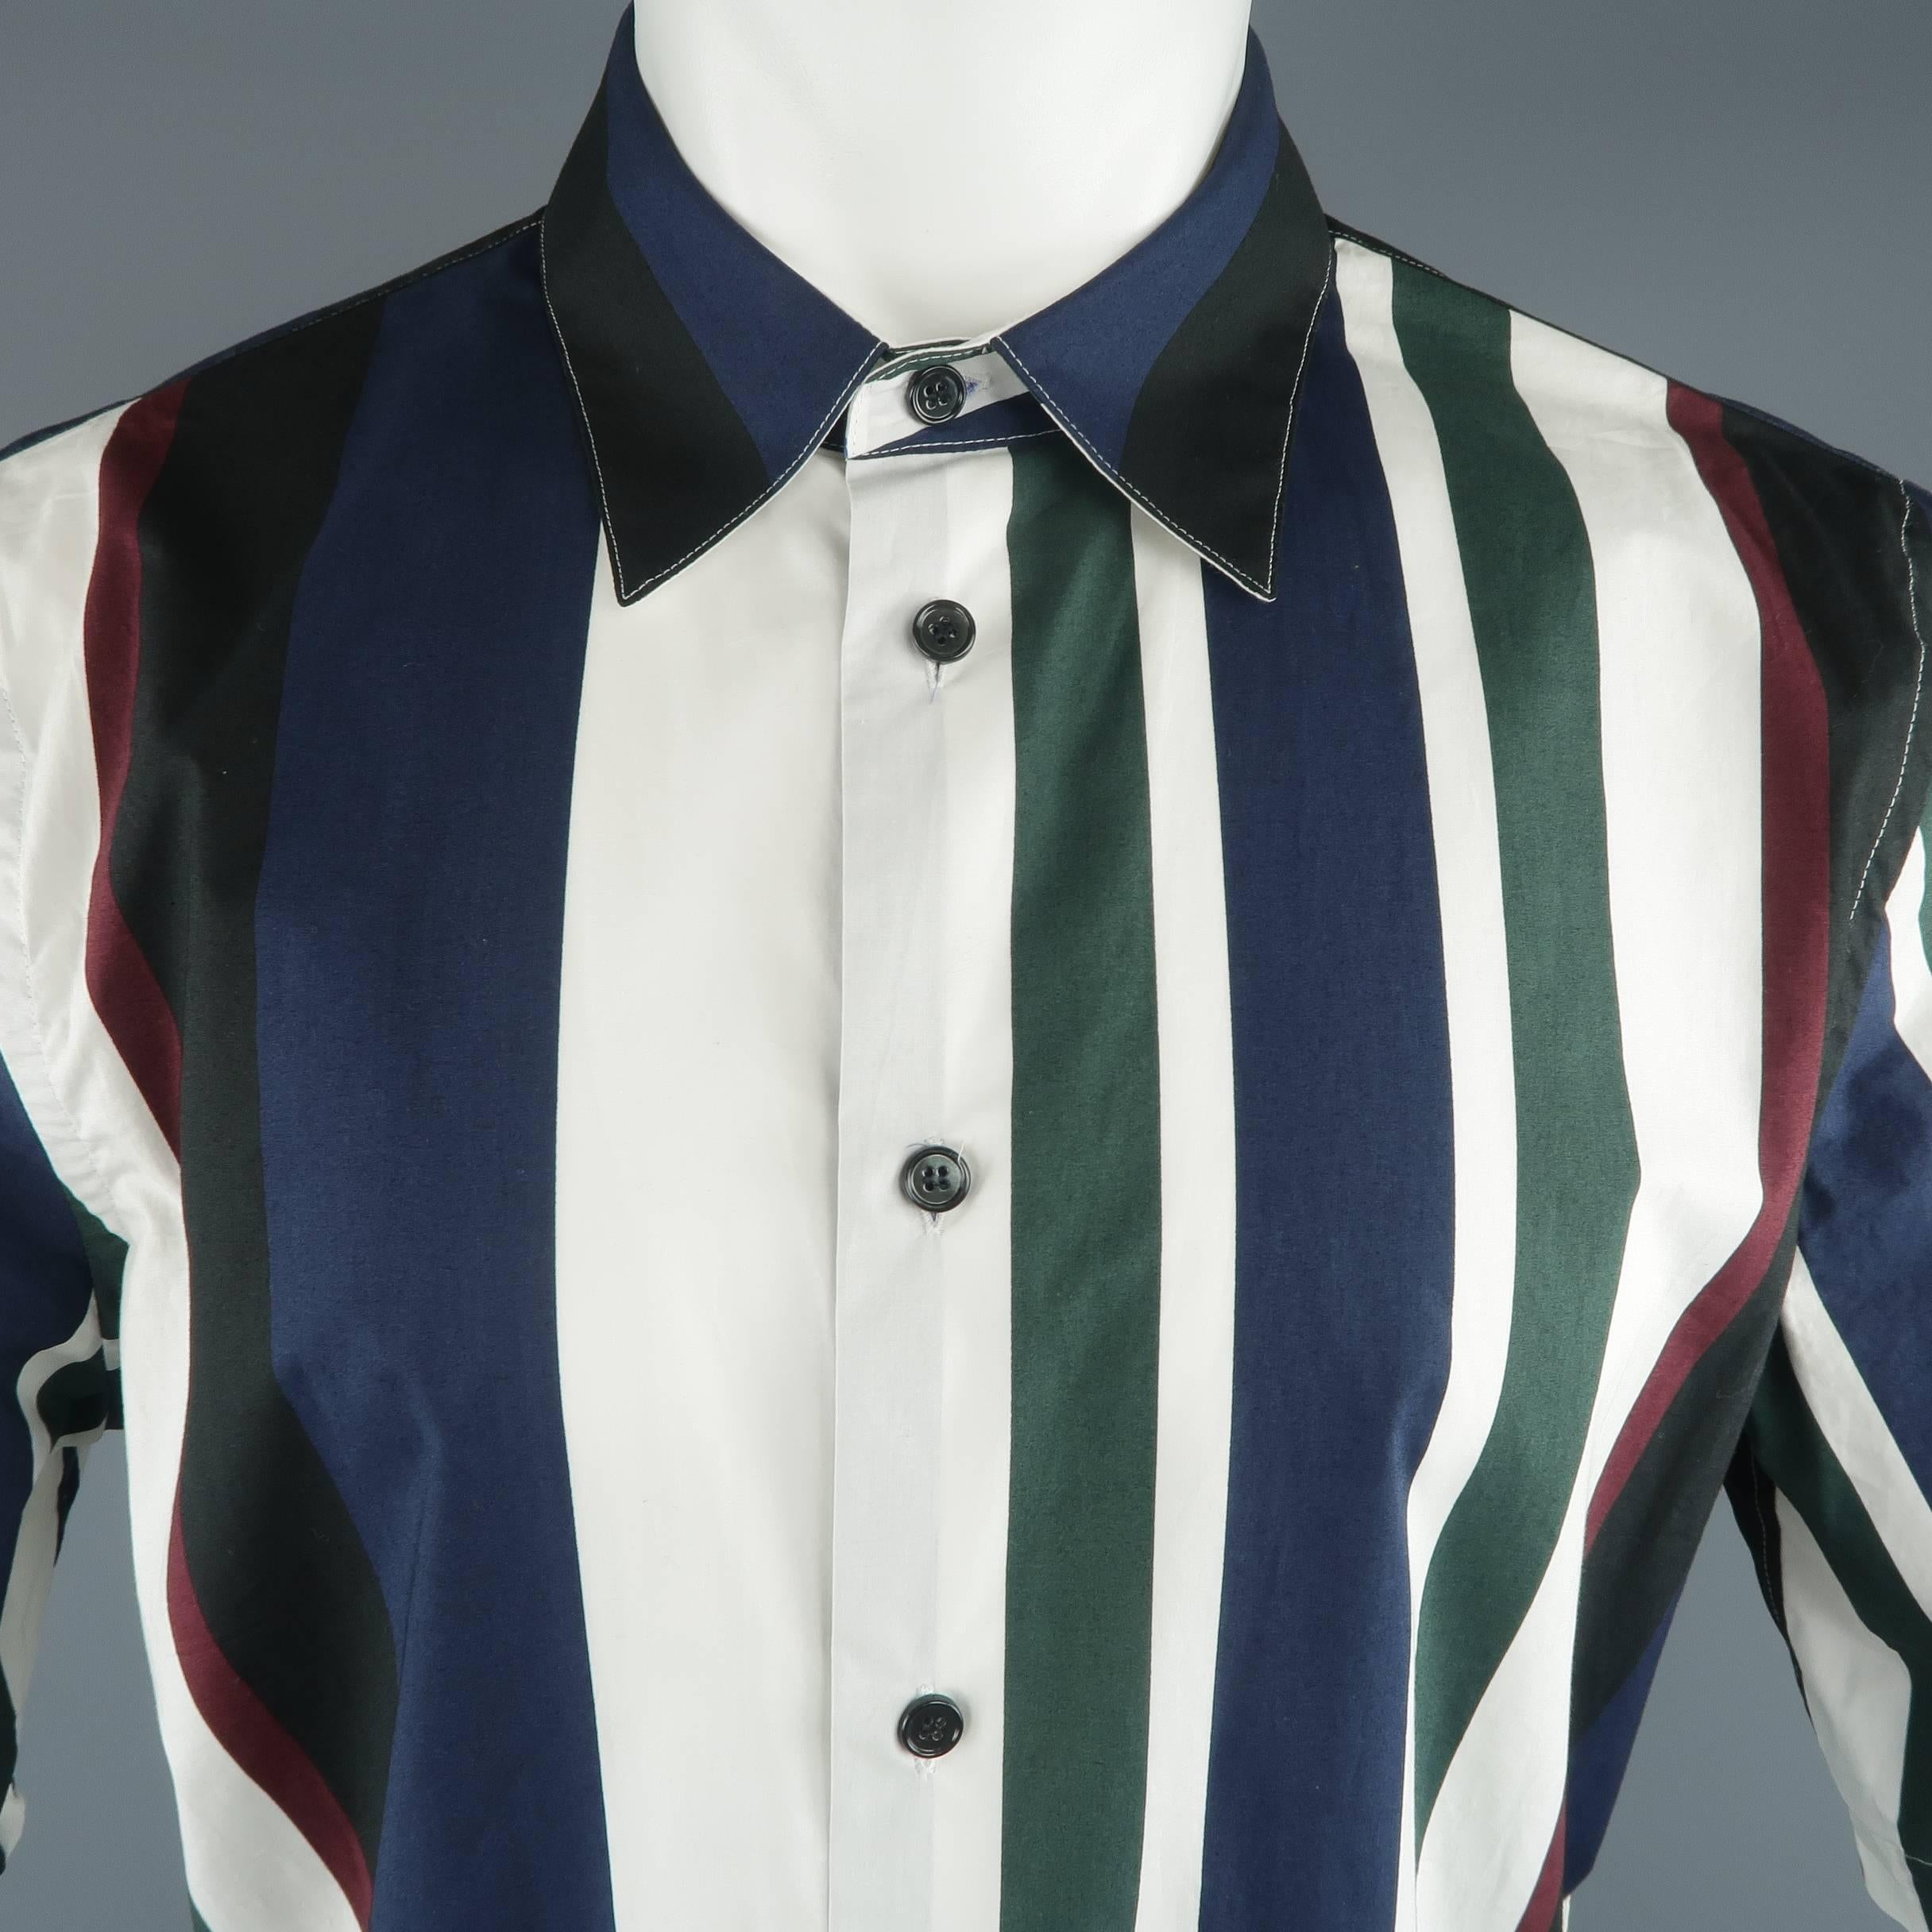 MARNI short sleeve button up shirt comes in white cotton with a pointed collar and navy, forest green, and burgundy stripe pattern throughout. Made in Italy.
 
Excellent Pre-Owned Condition.
Marked: IT 52
 
Measurements:
 
Shoulder: 18 in.
Chest: 46